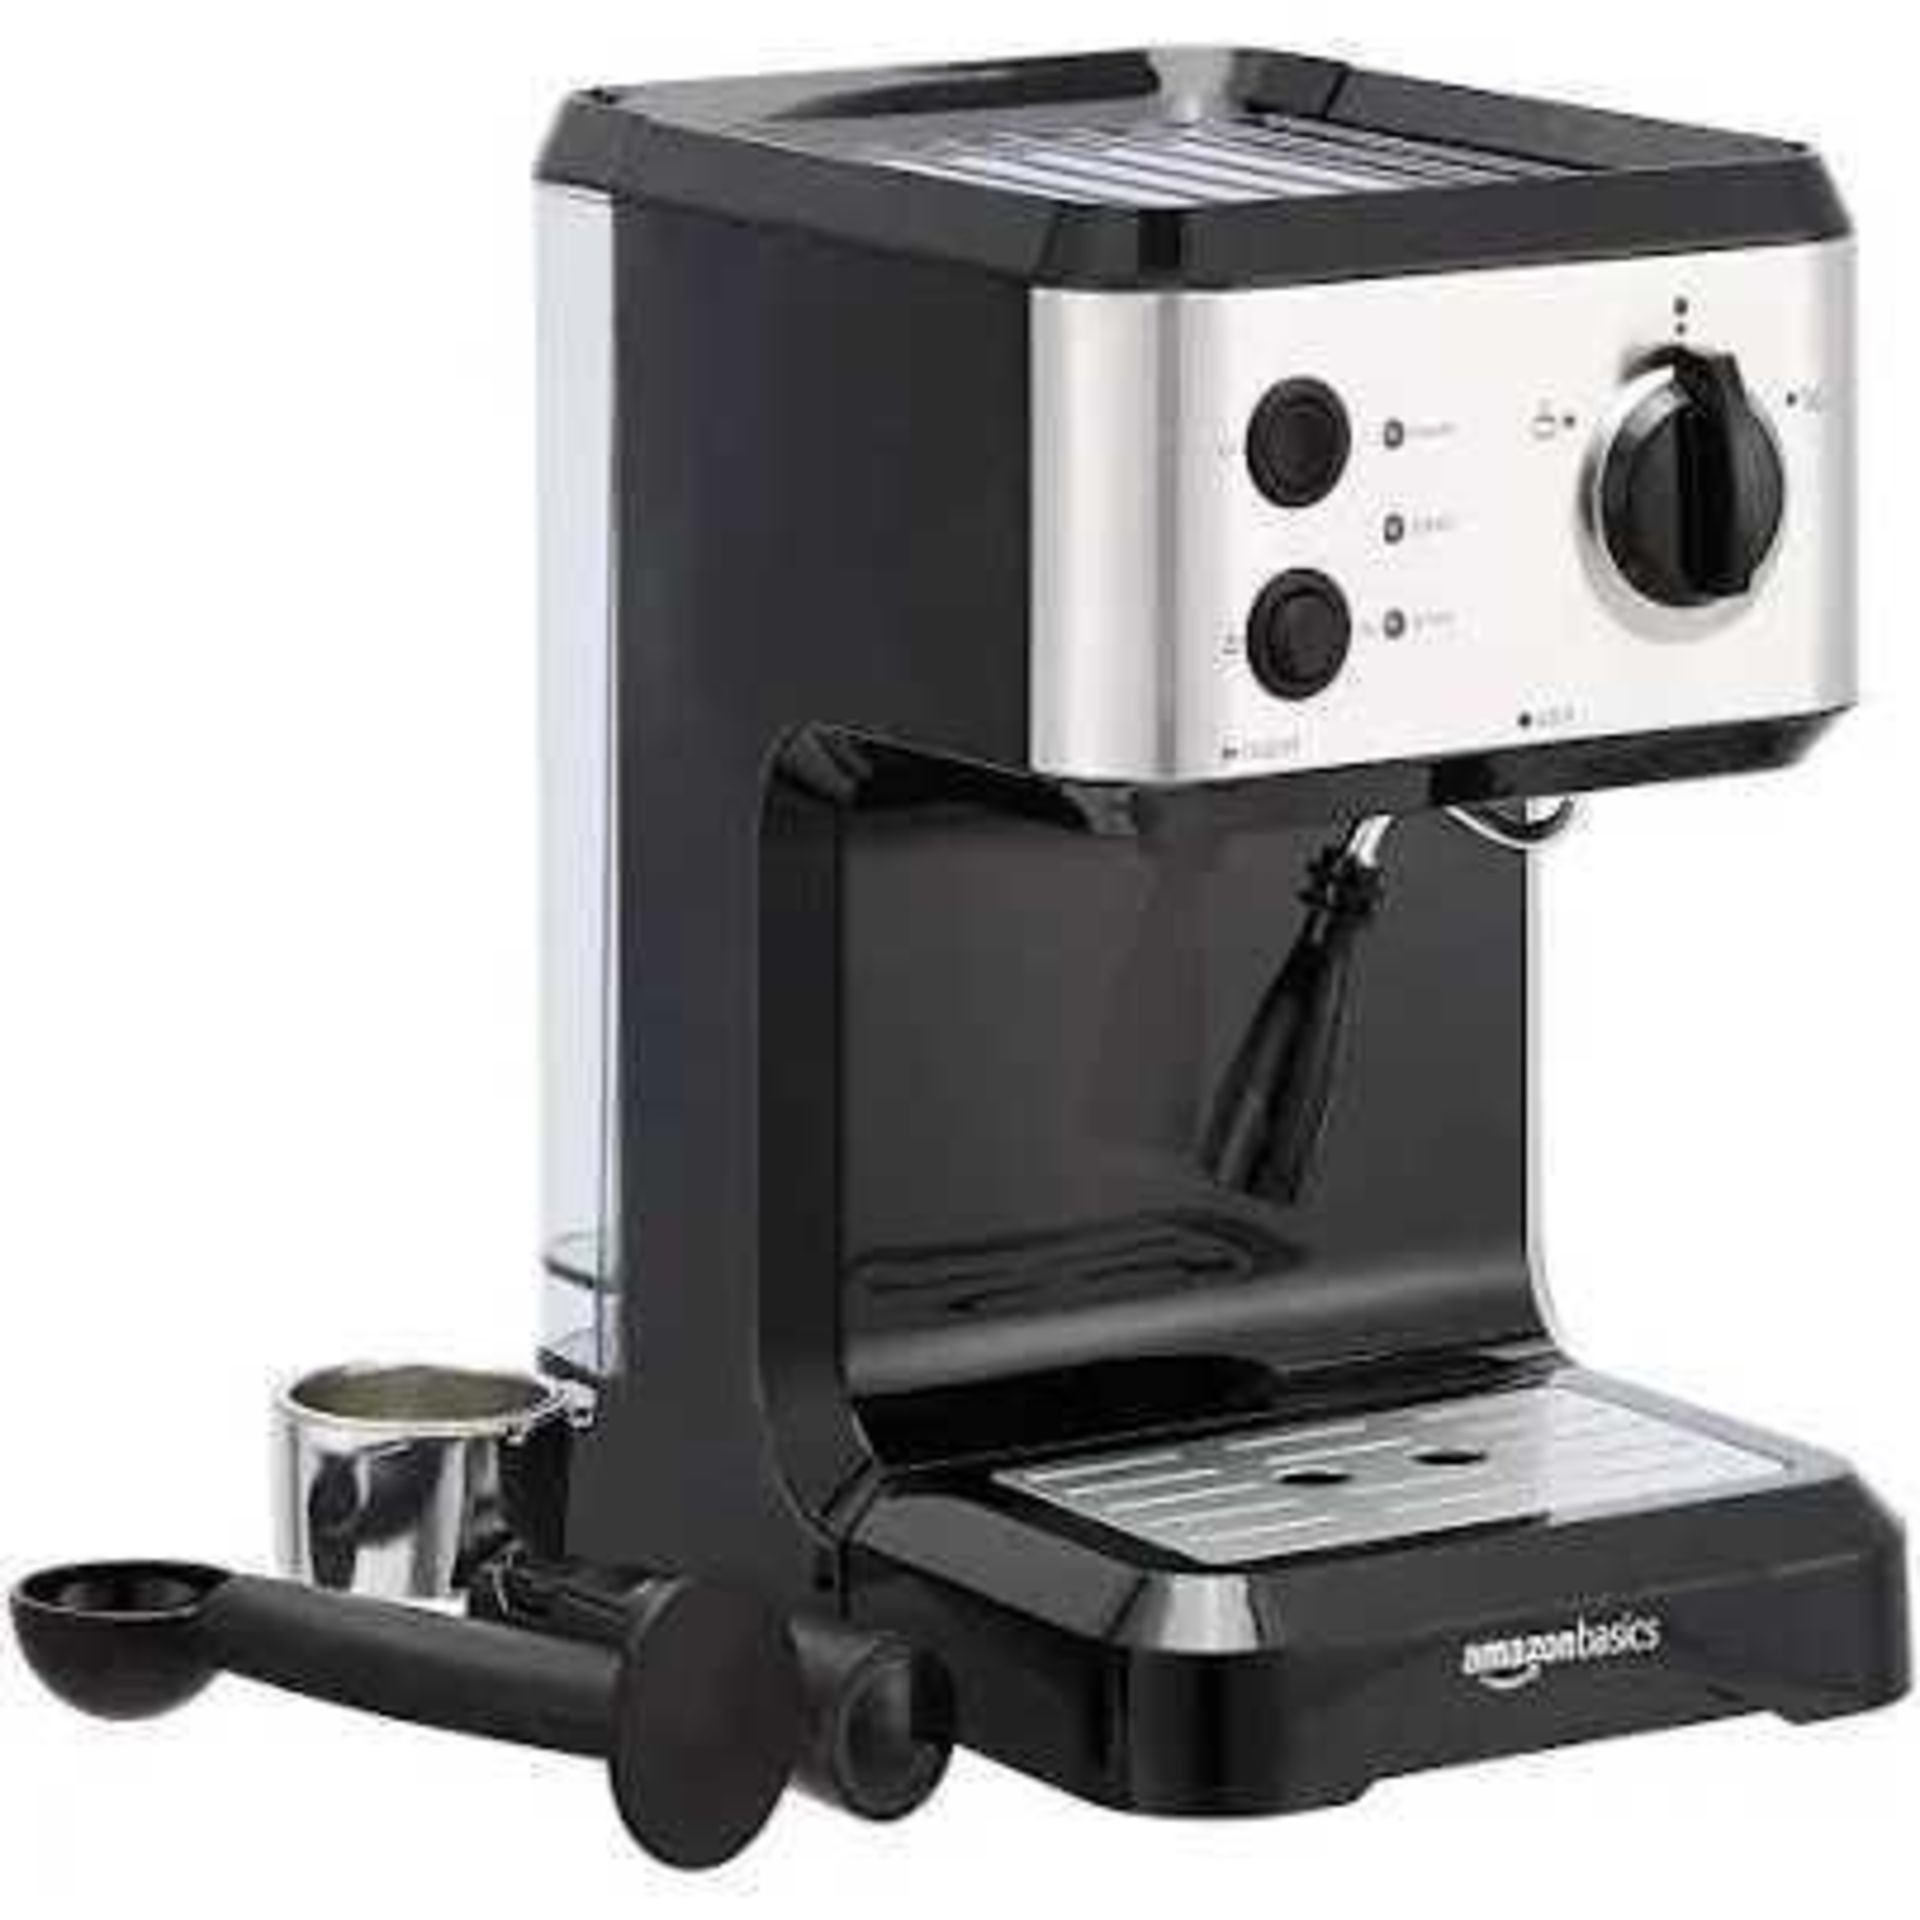 RRP £100 Boxed Brand New Amazon Basics Espresso Coffee Machine With Milk Frother - Image 2 of 3